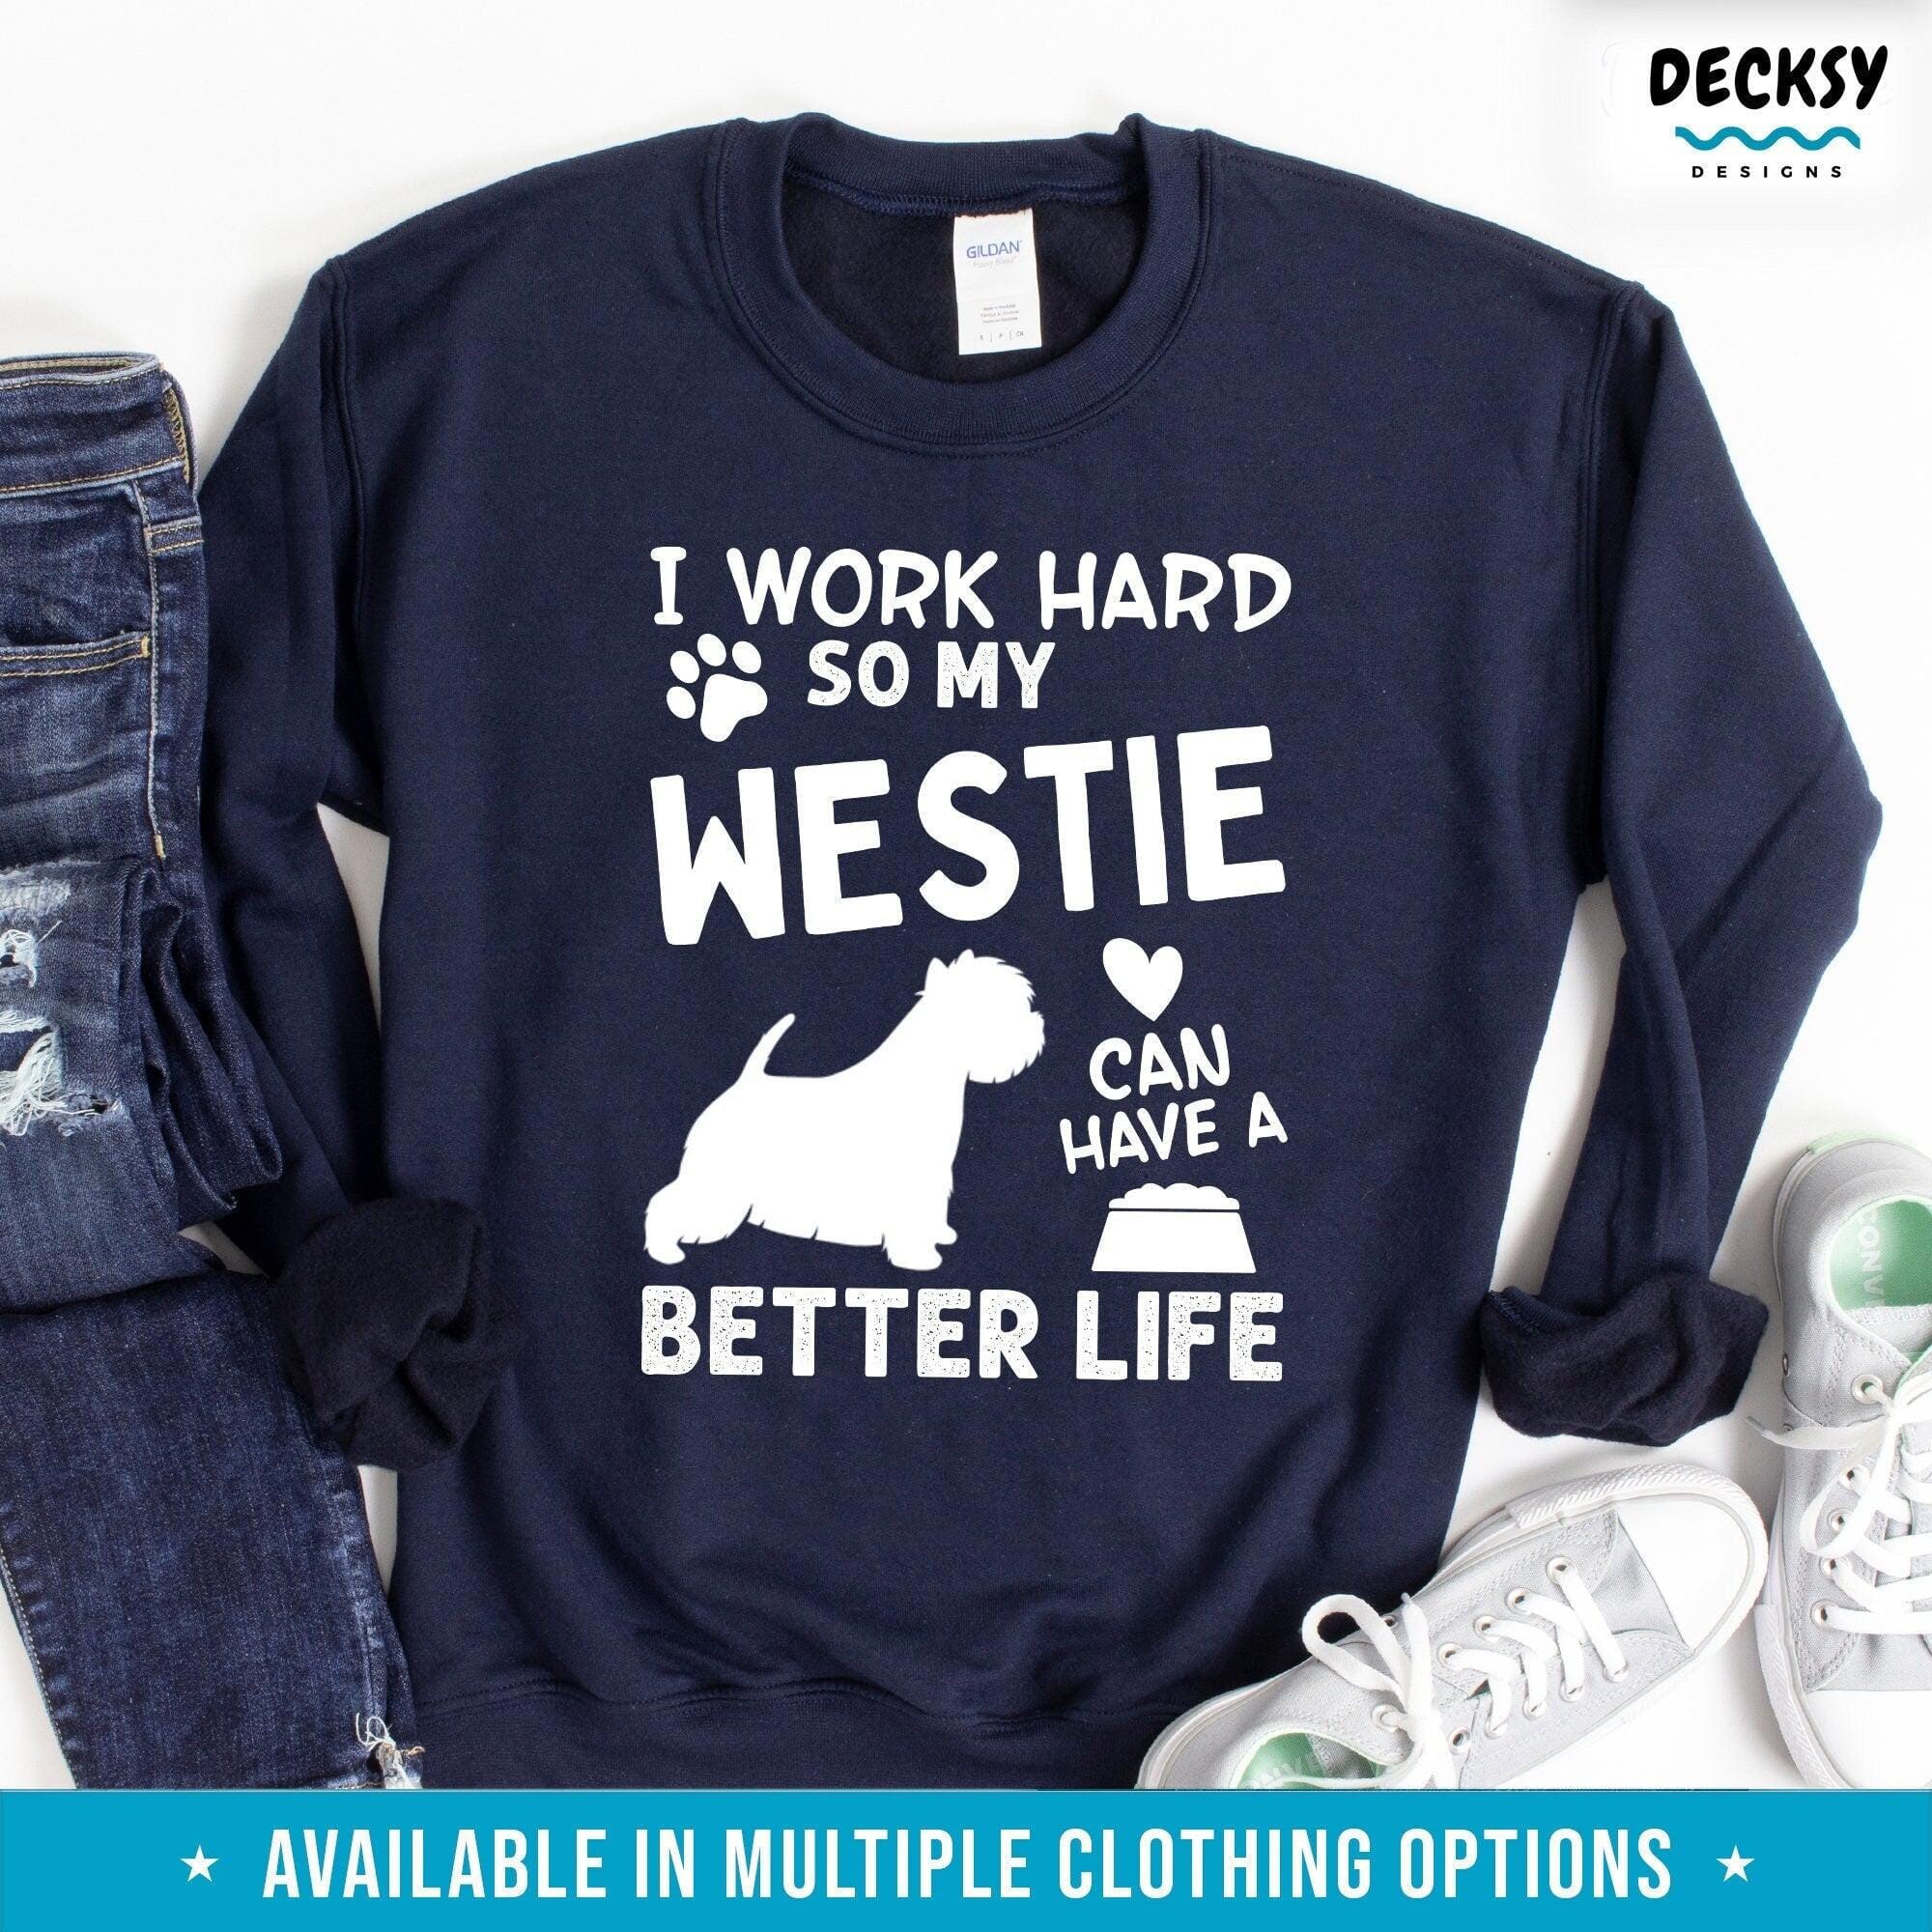 Westie Sweatshirt, West Highland White Terrier Gift-Clothing:Gender-Neutral Adult Clothing:Tops & Tees:T-shirts:Graphic Tees-DecksyDesigns